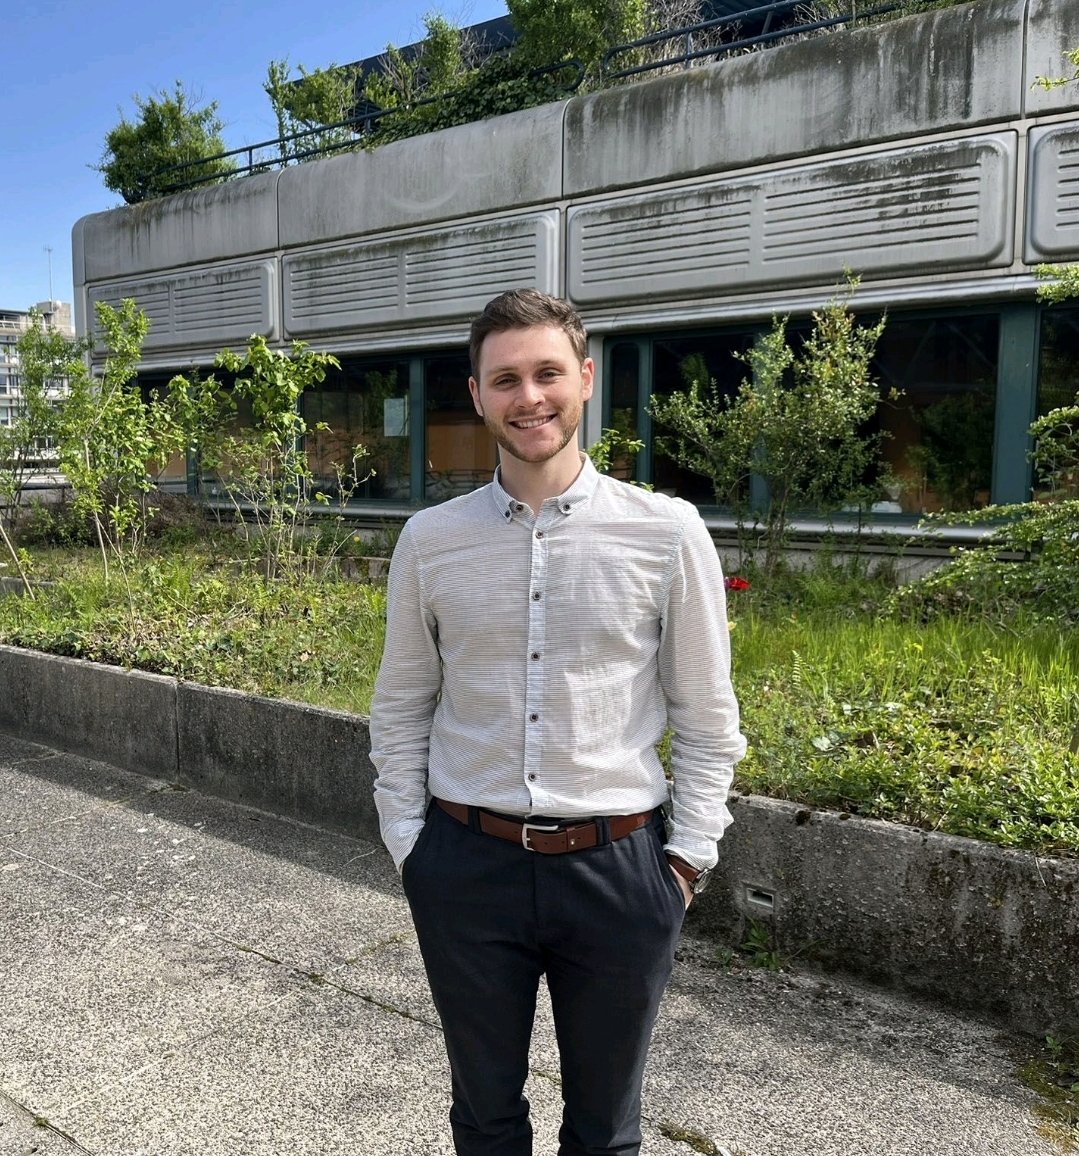 Glad to share that @SimonDumolard passed today his candidacy exam! 🌟 🎊 Congratulations and thank you to the jury for joining his exam👏 

#candidacyexam #PhDstudent #phdlife #chemtwitter #congratulations